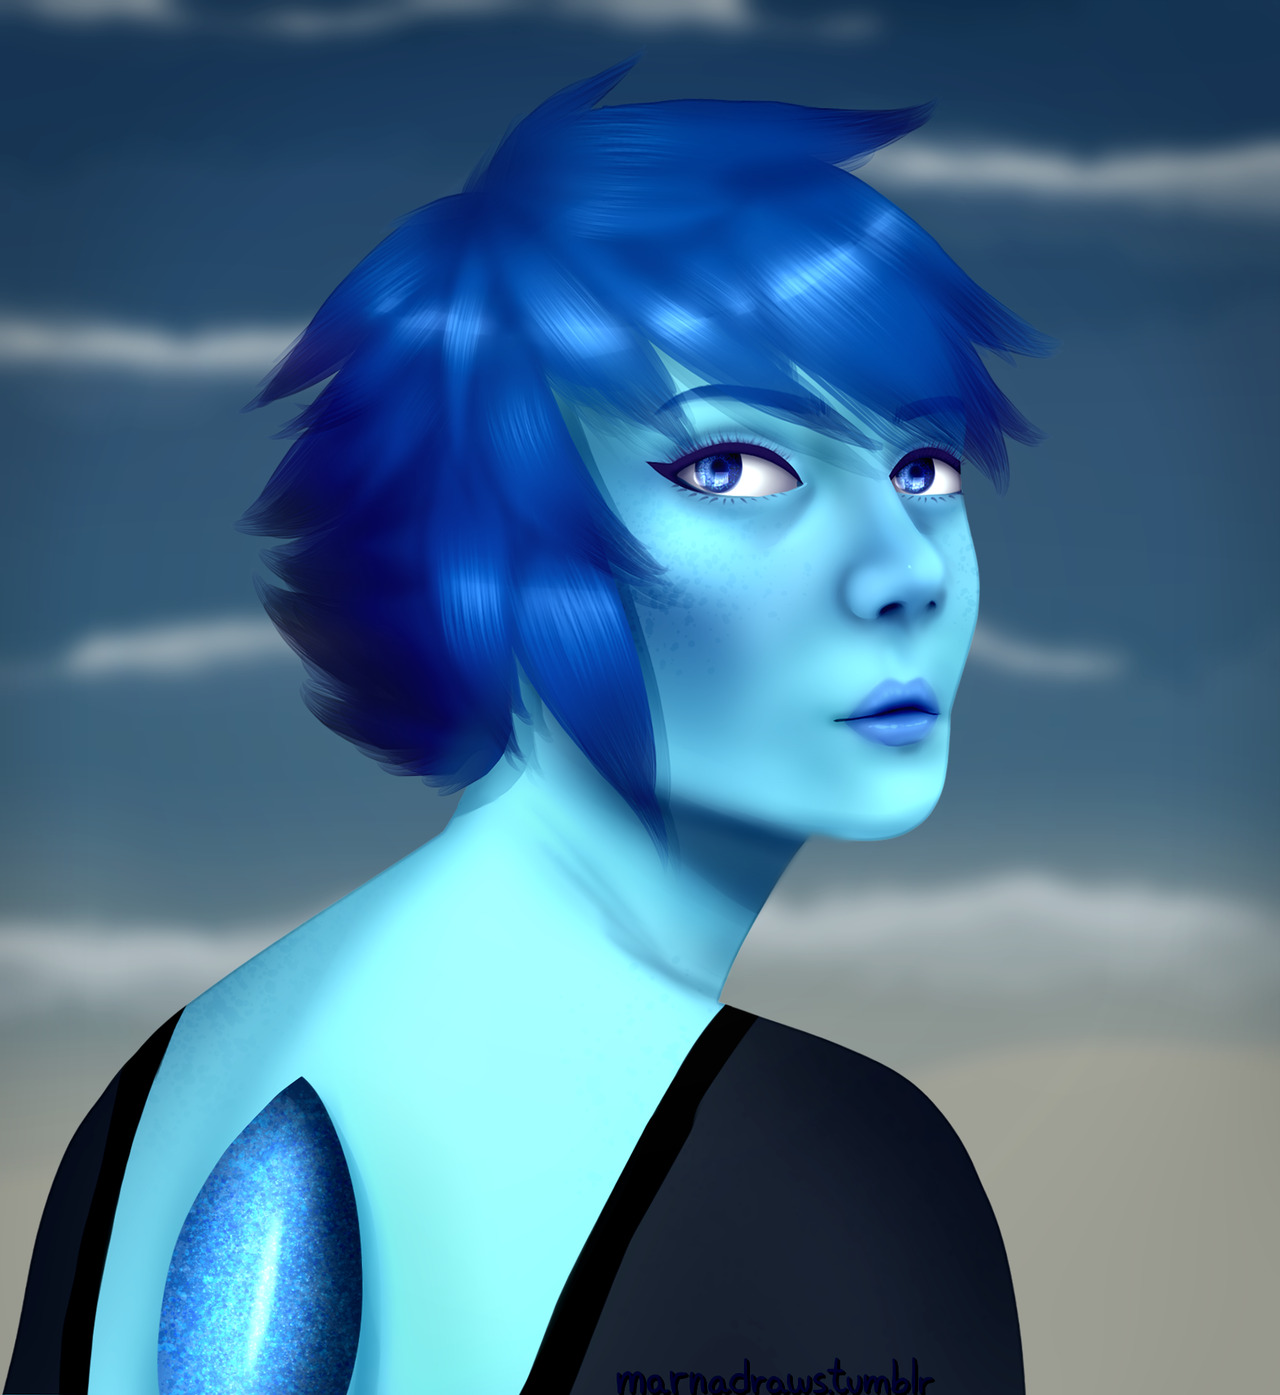 Shading hair is weird, but I think the background looks nice.